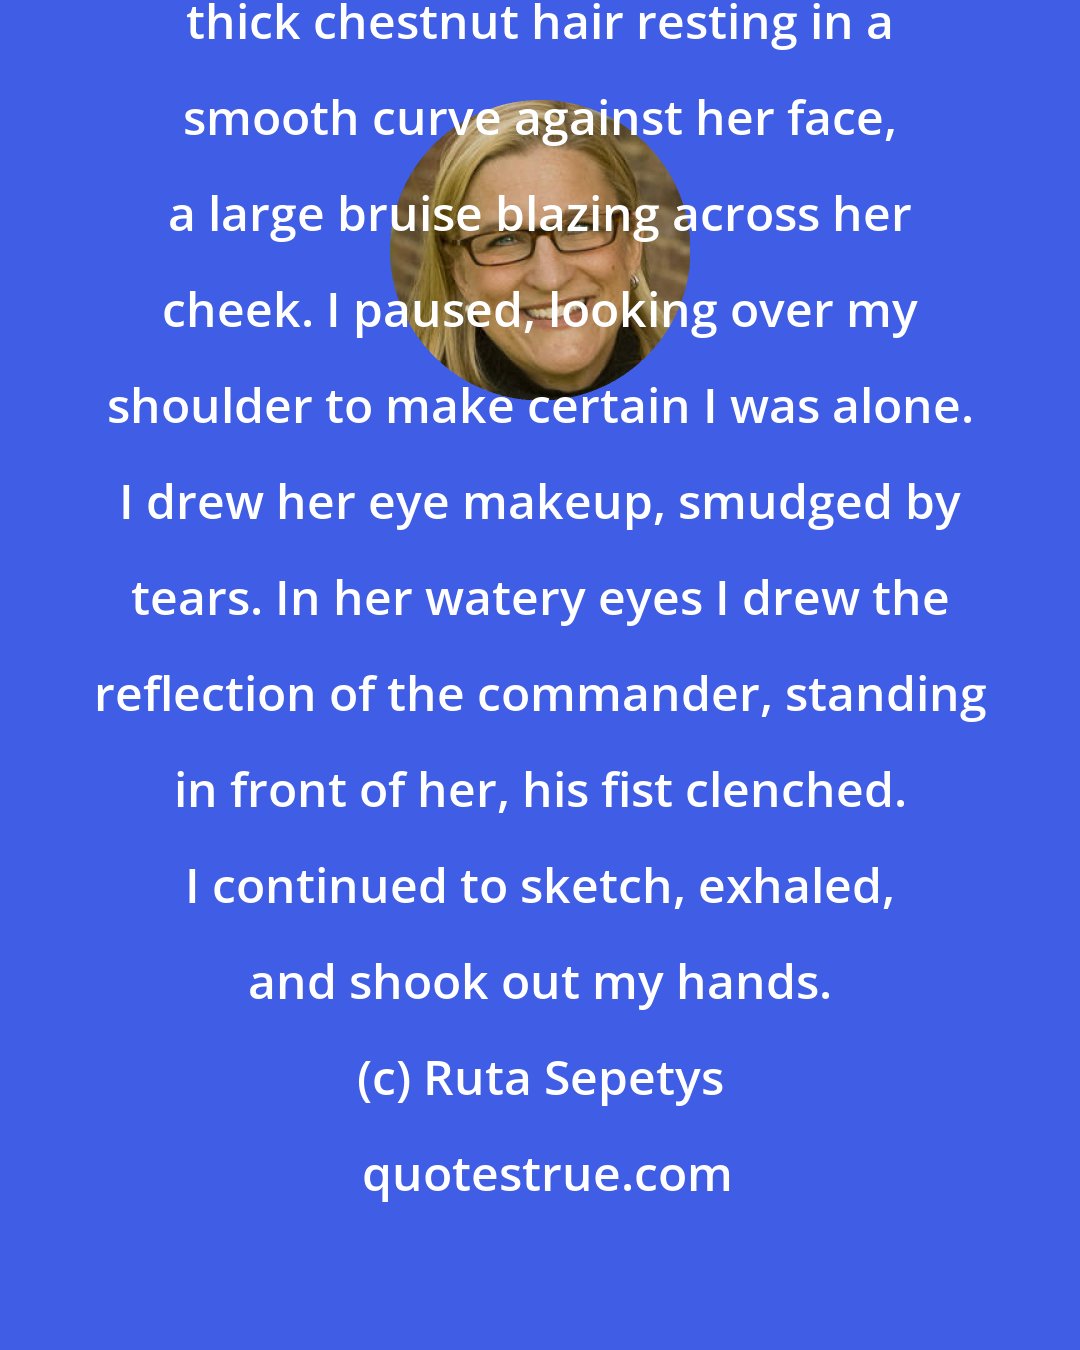 Ruta Sepetys: My breathing slowed. I shaded her thick chestnut hair resting in a smooth curve against her face, a large bruise blazing across her cheek. I paused, looking over my shoulder to make certain I was alone. I drew her eye makeup, smudged by tears. In her watery eyes I drew the reflection of the commander, standing in front of her, his fist clenched. I continued to sketch, exhaled, and shook out my hands.